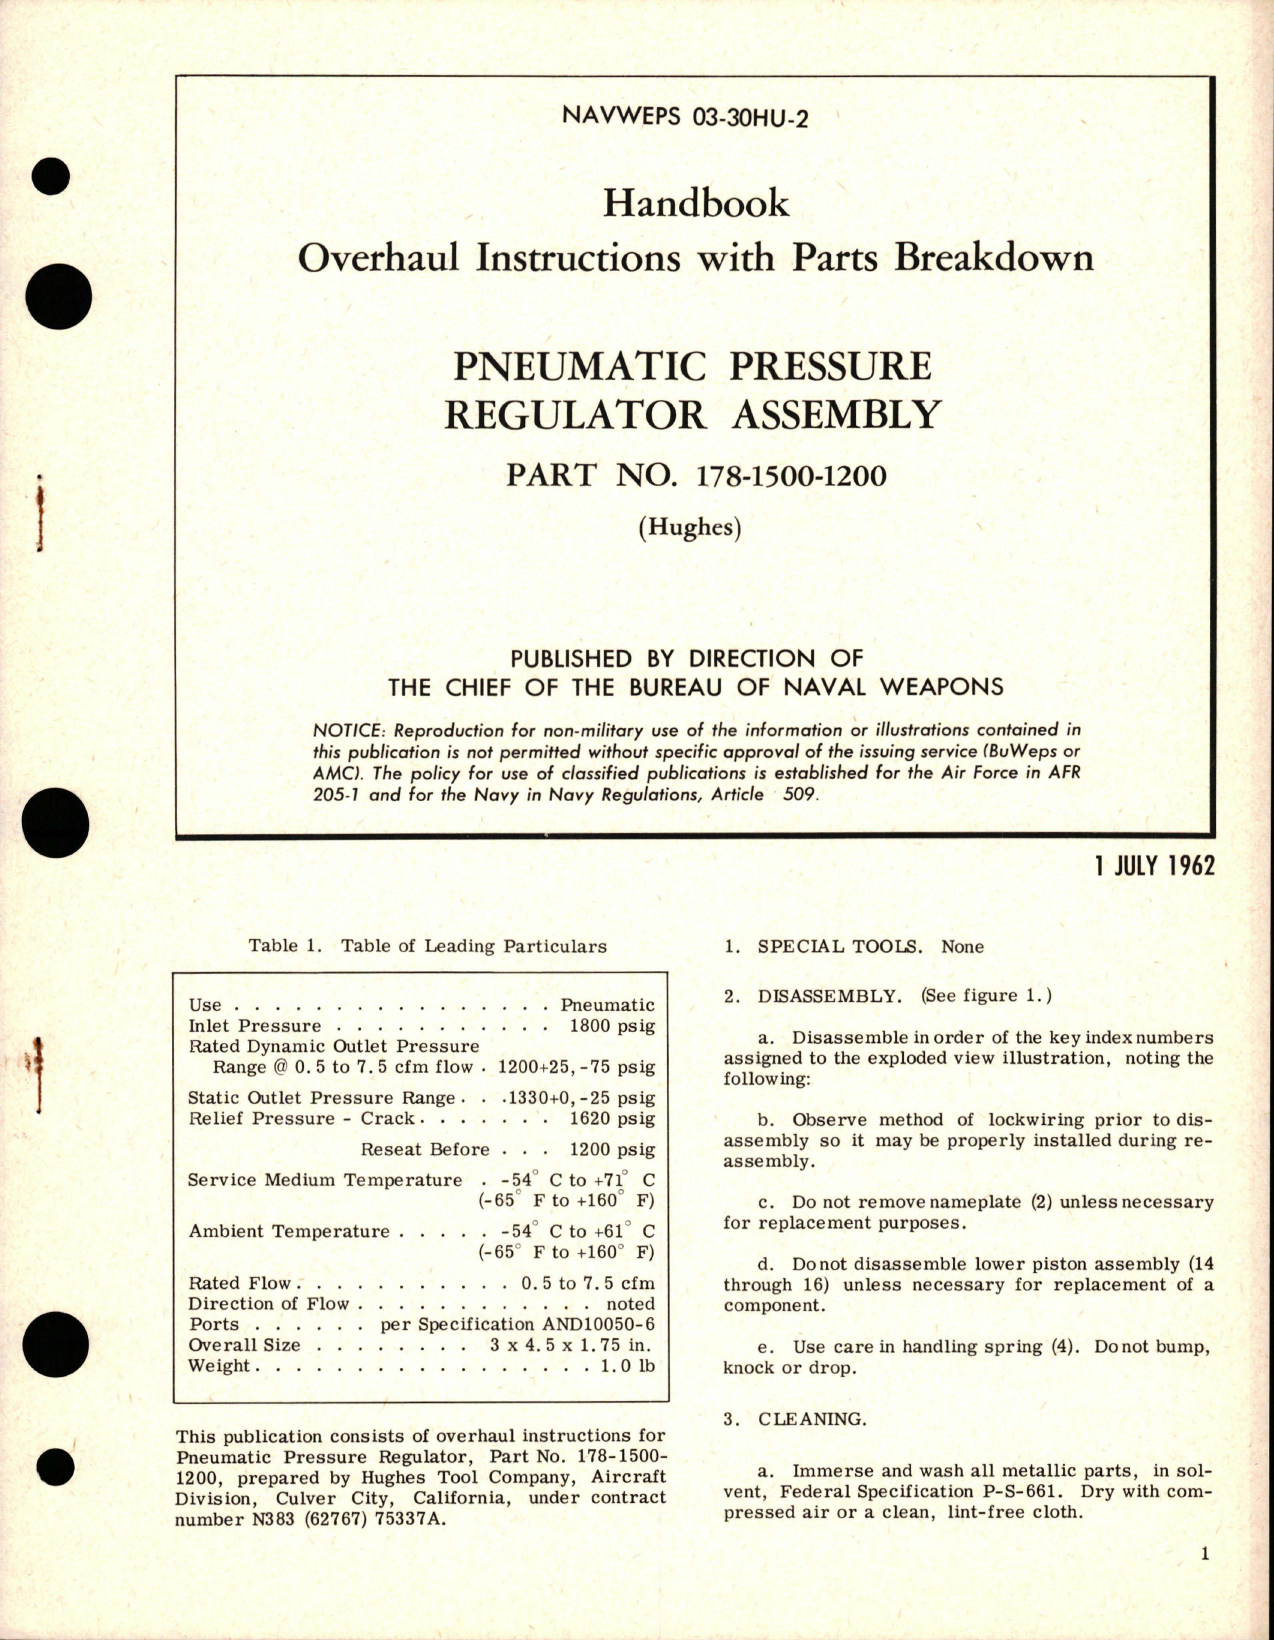 Sample page 1 from AirCorps Library document: Overhaul Instructions with Parts Breakdown for Pneumatic Pressure Regulator Assembly - Part 178-1500-1200 